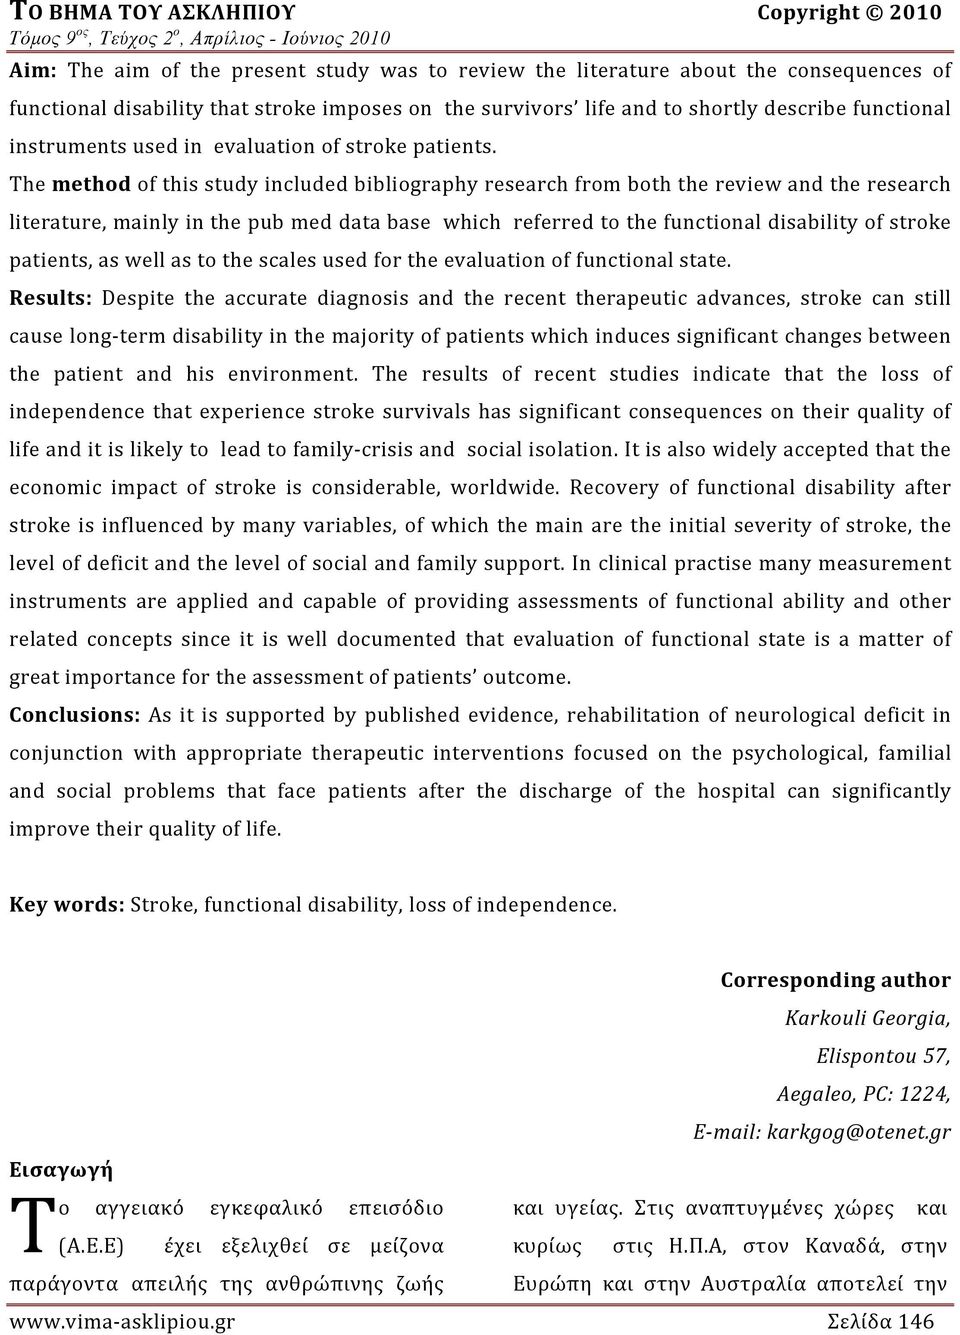 The method οf this study included bibliography research from both the review and the research literature, mainly in the pub med data base which referred to the functional disability of stroke